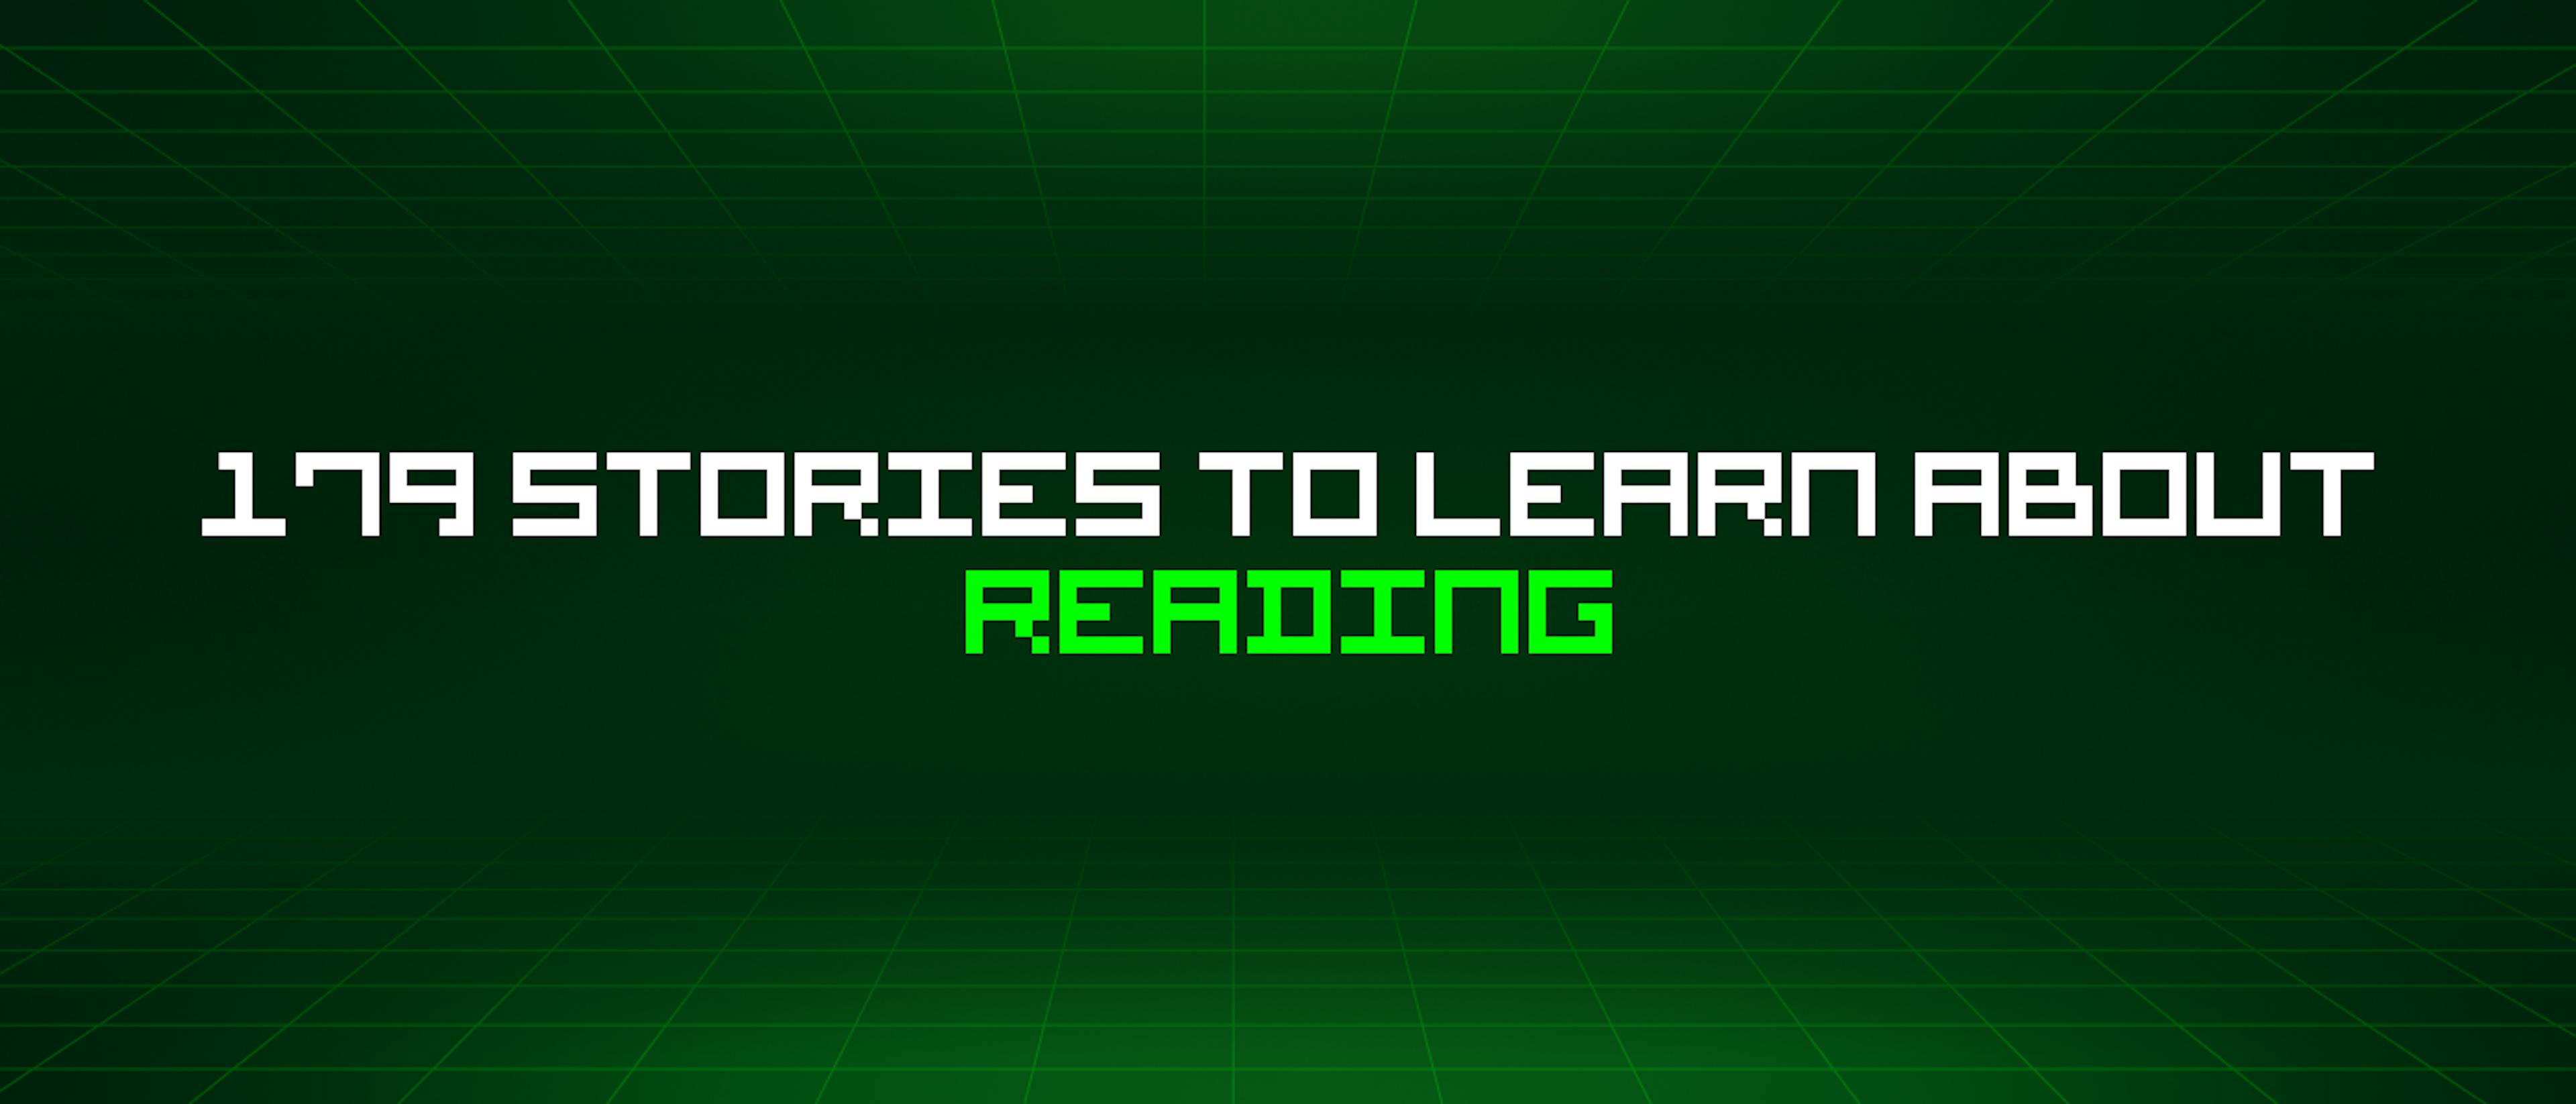 featured image - 179 Stories To Learn About Reading